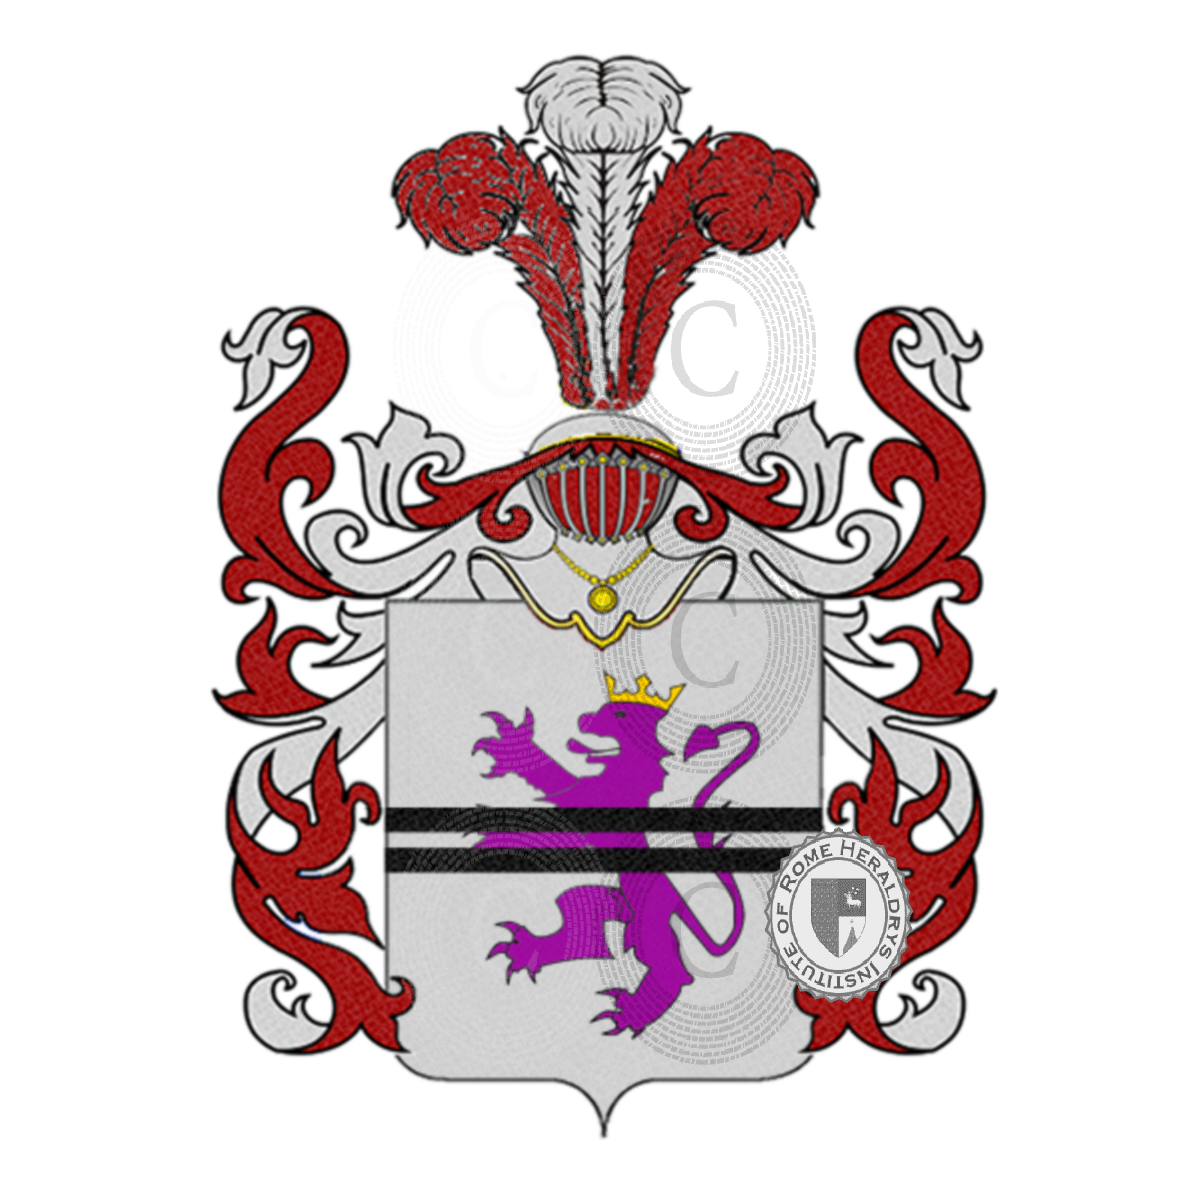 Coat of arms of familycanese    